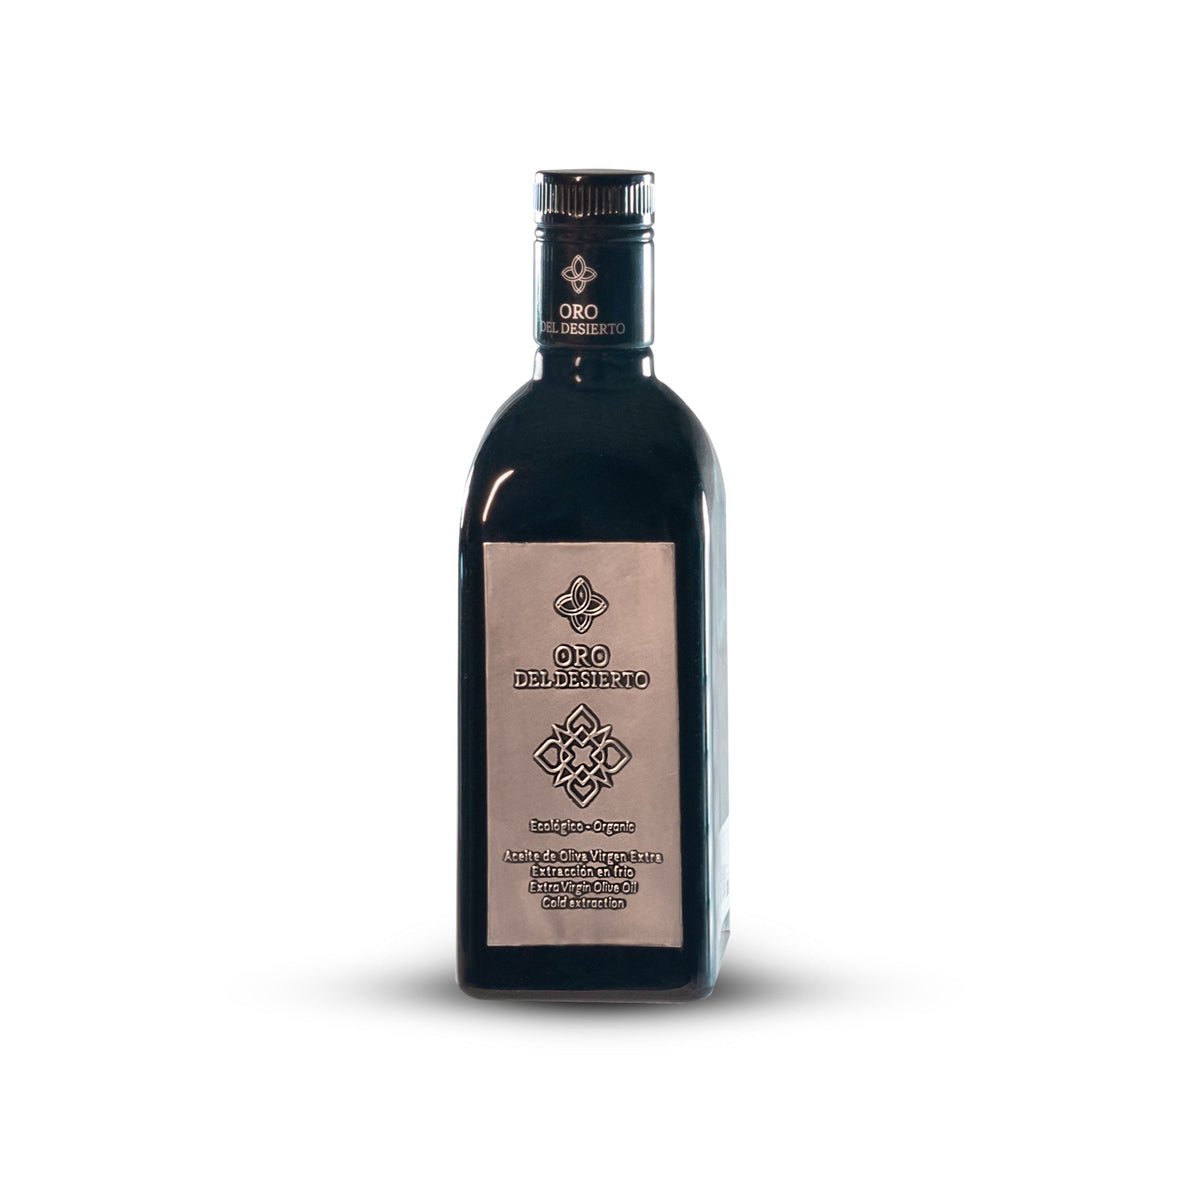 COUPAGE by ORO DEL DESIERTO - Extra virgin olive oil from the heart of Spain